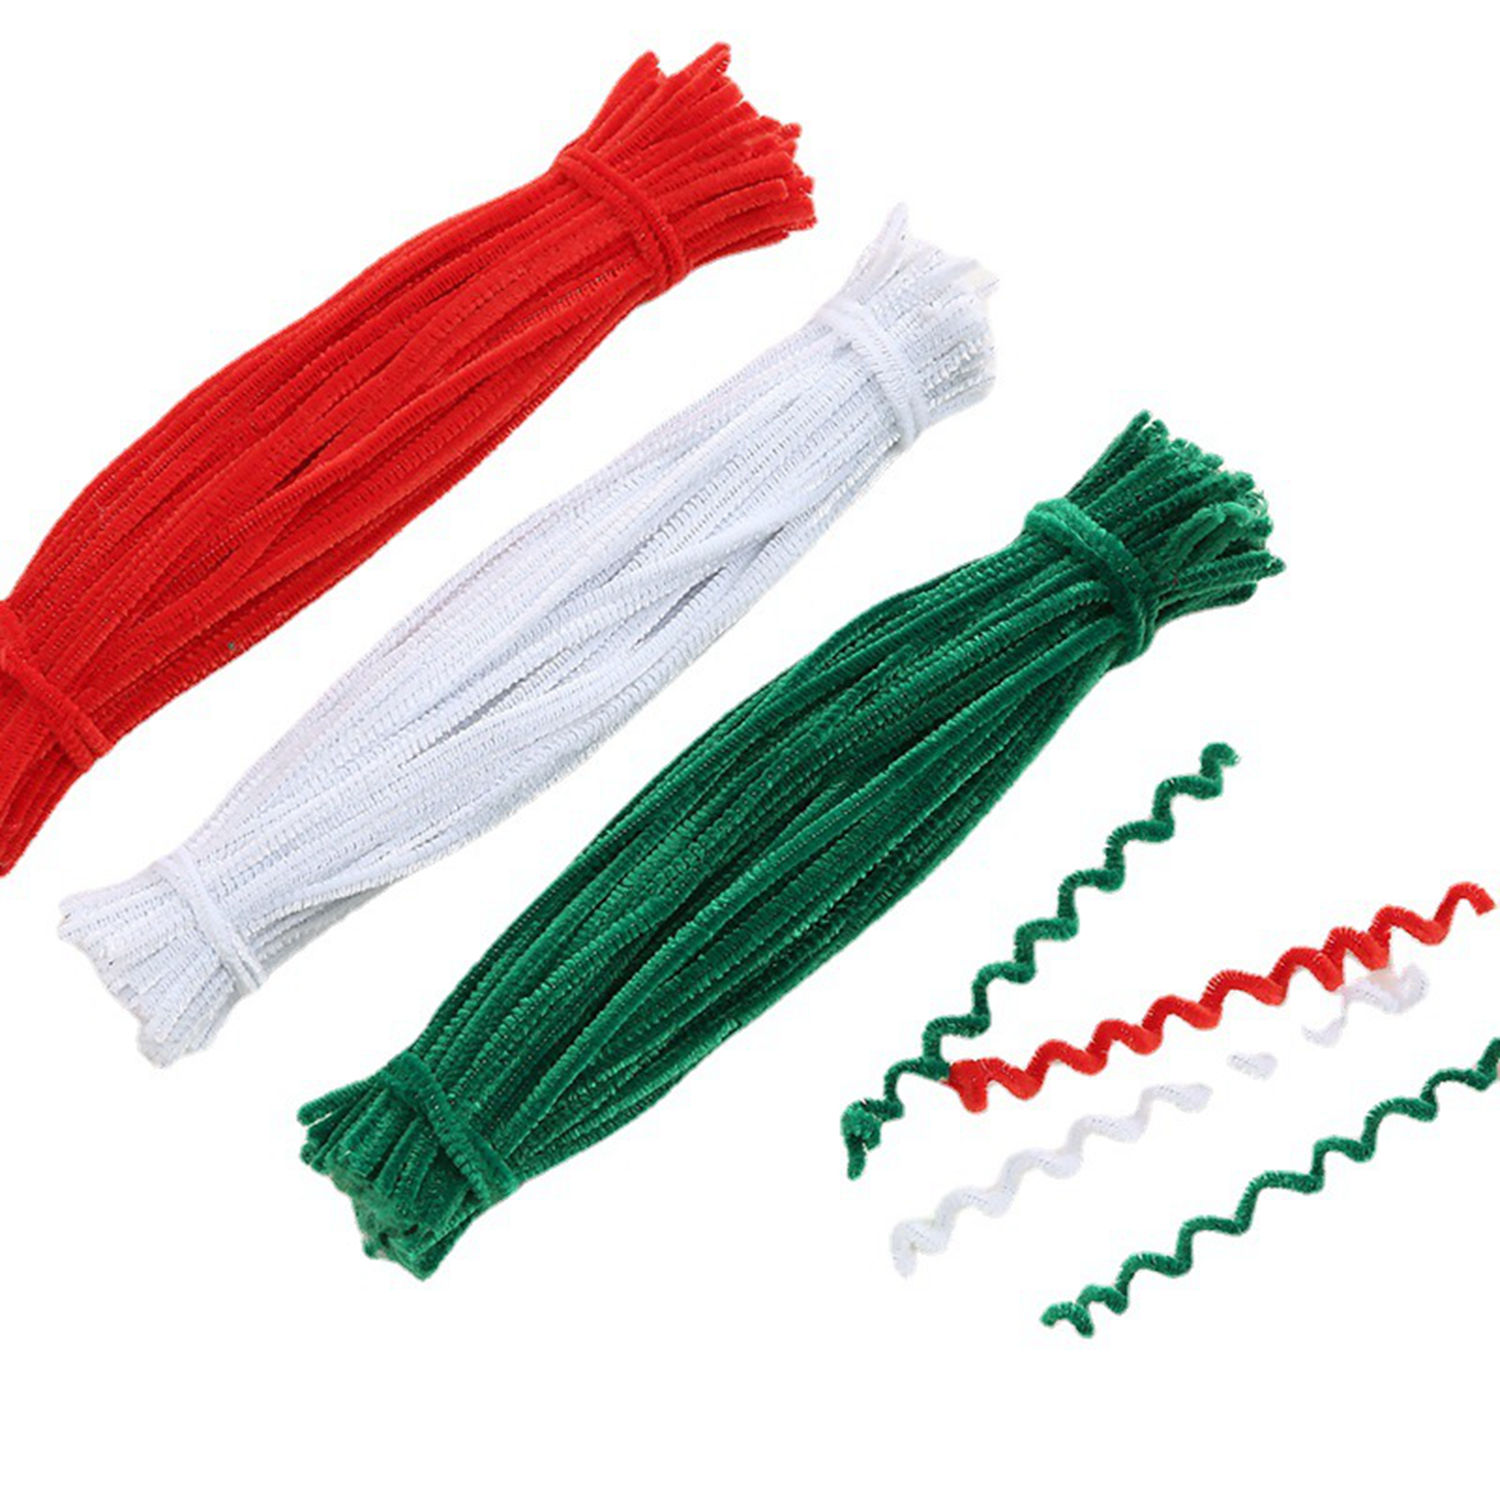 chenille stems pipe cleaners craft supplies